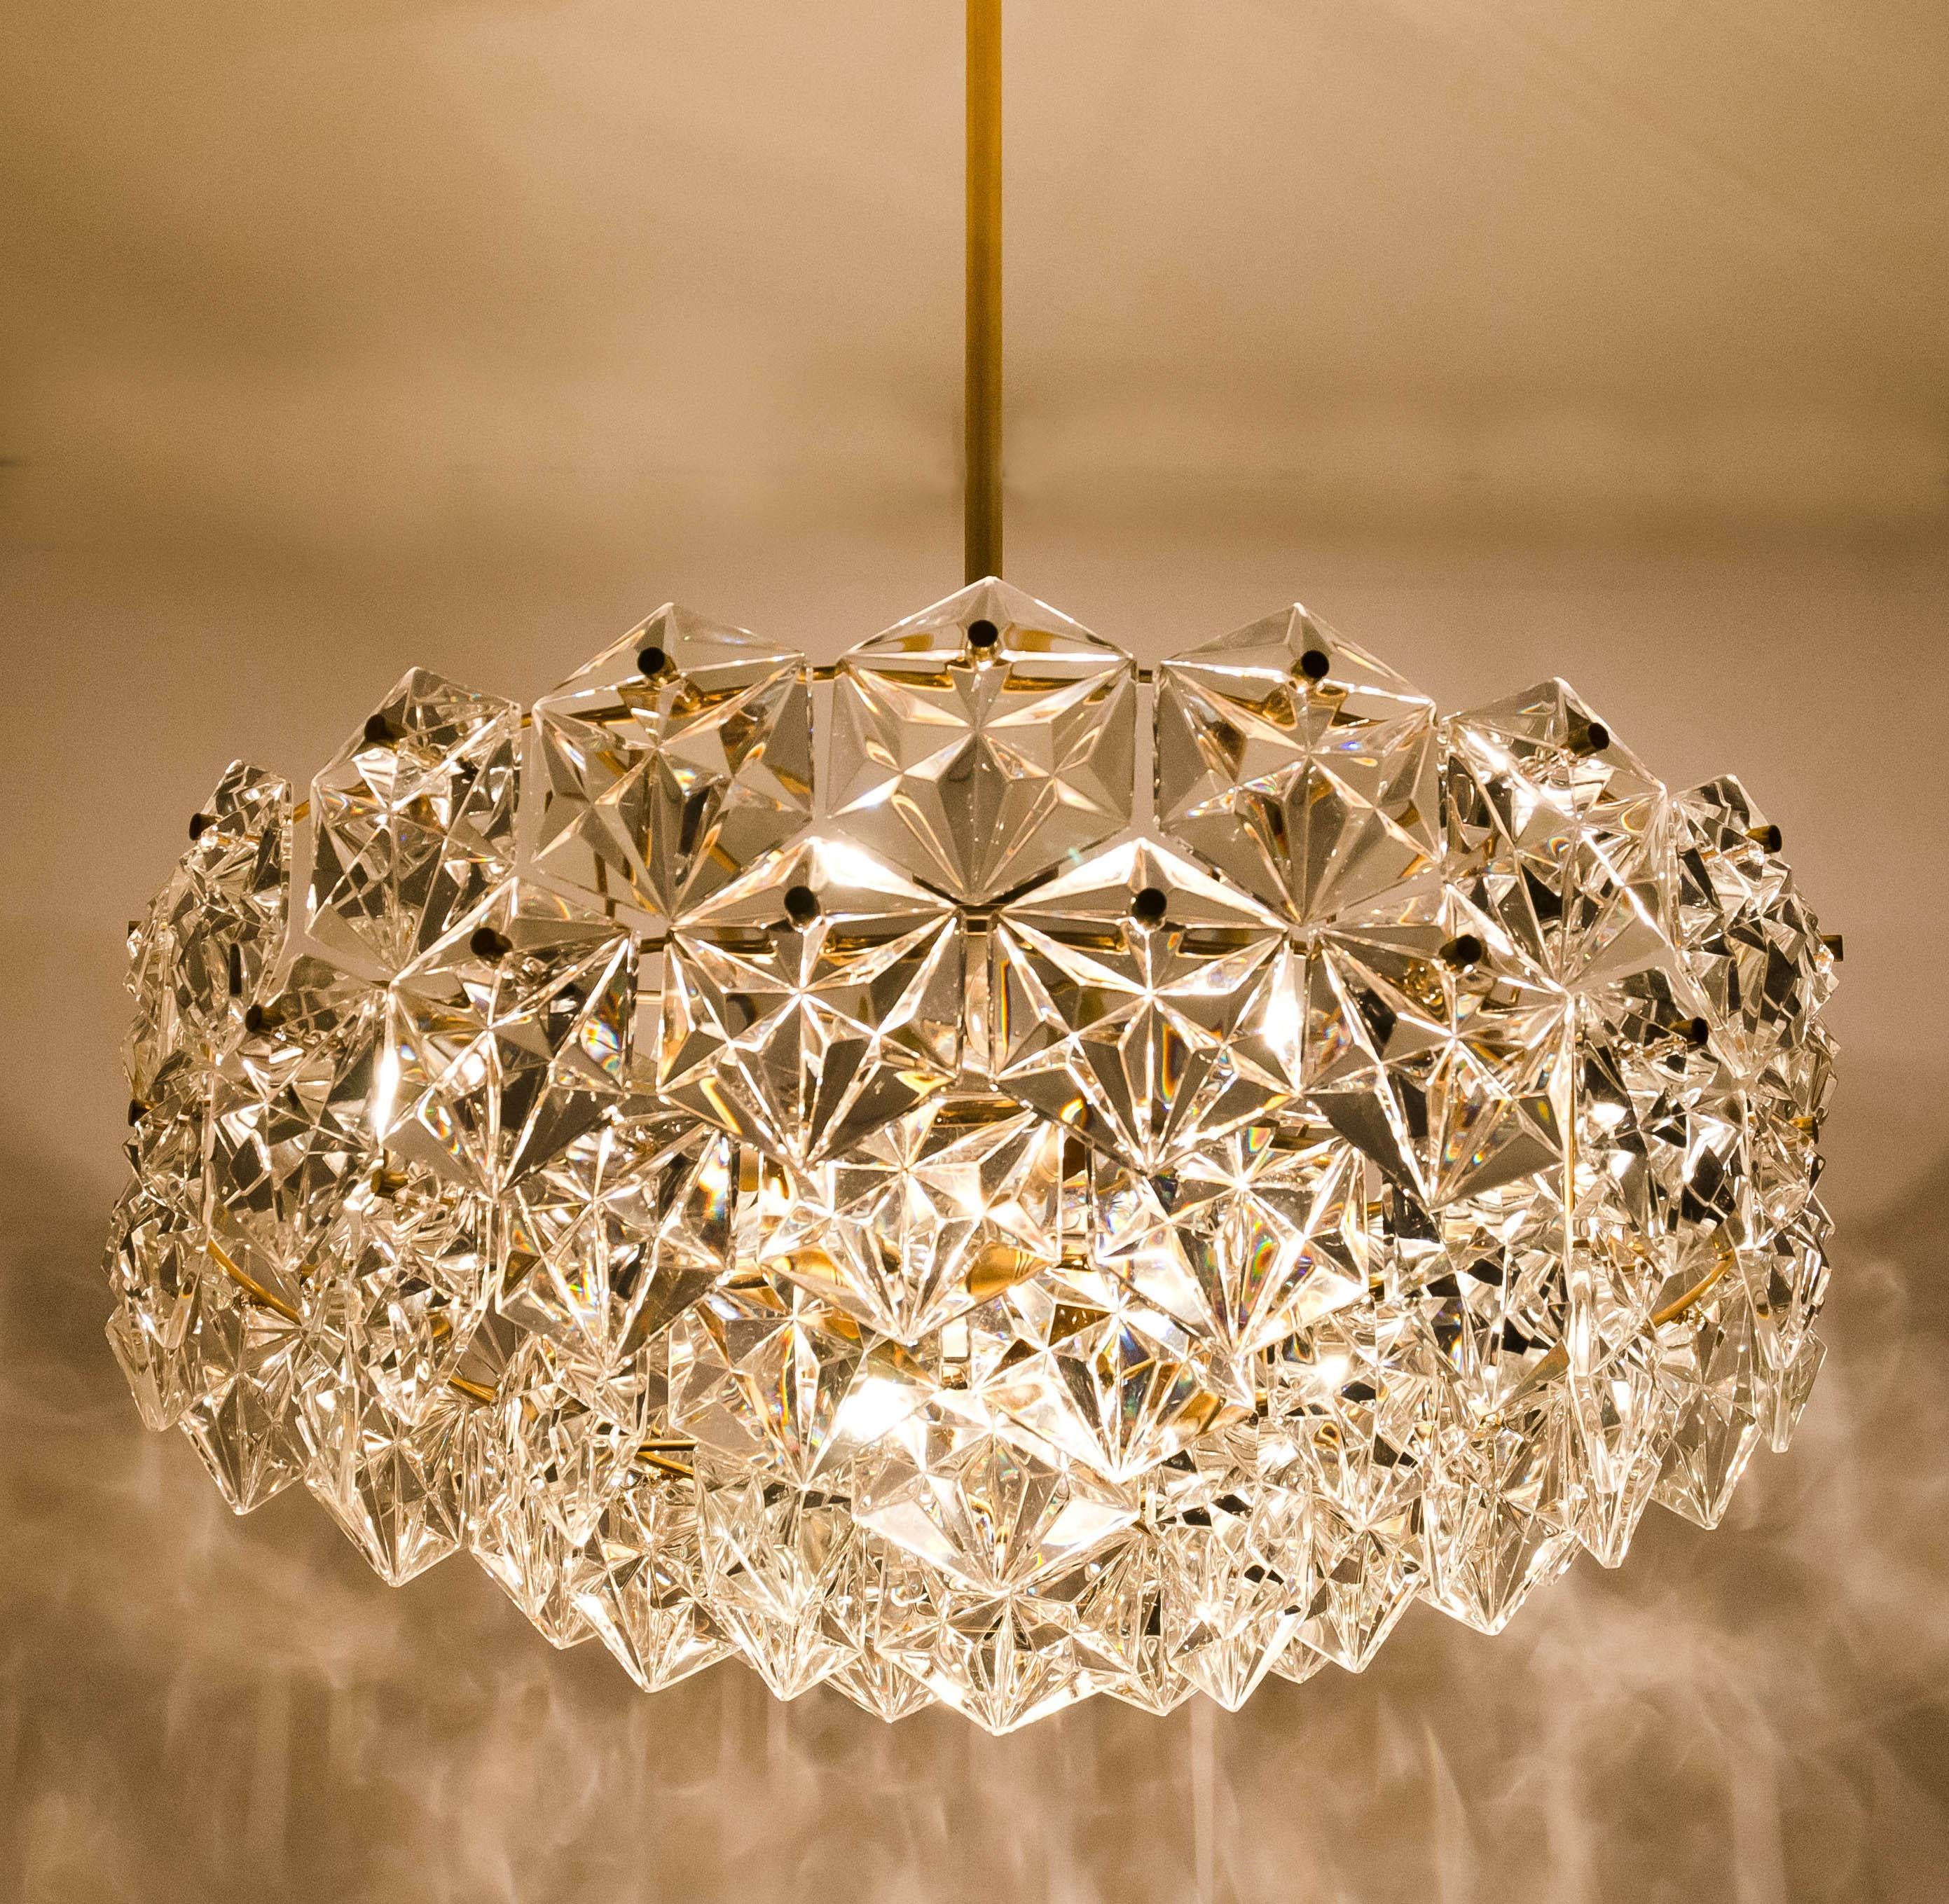 This modernist design chandeliers were designed by the Kinkeldey design team during the 1970s, and manufactured in Germany. A very elegant Kinkeldey chandelier, it is comfortable with all decor periods. The crystals are meticulously cut in such a